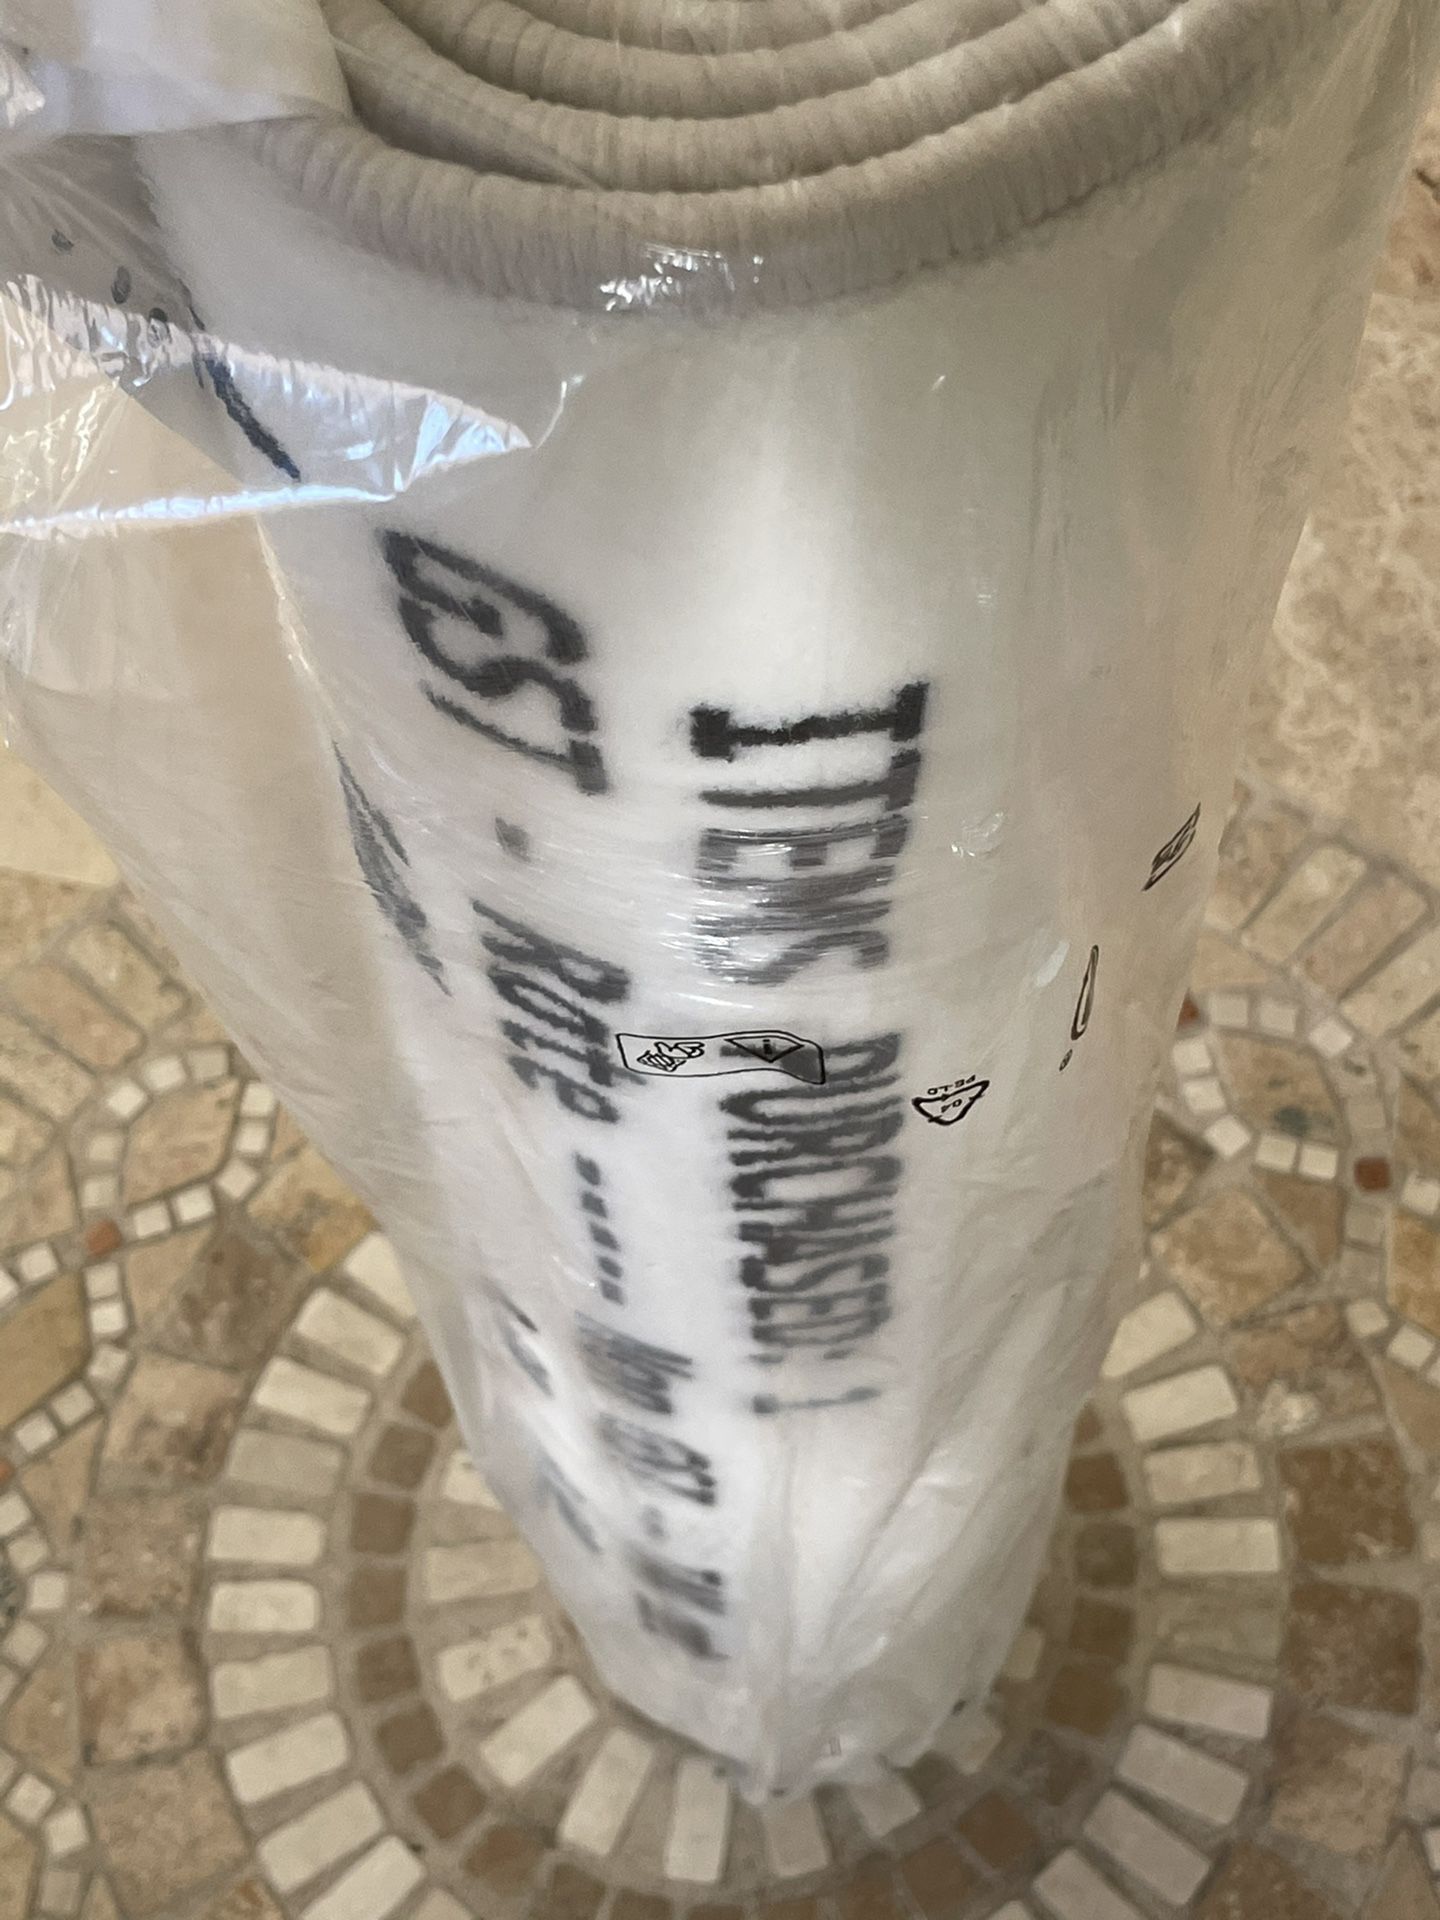 IKEA Virgil Abloh Off White Markerad Dining Chairs x2 for Sale in Miami, FL  - OfferUp